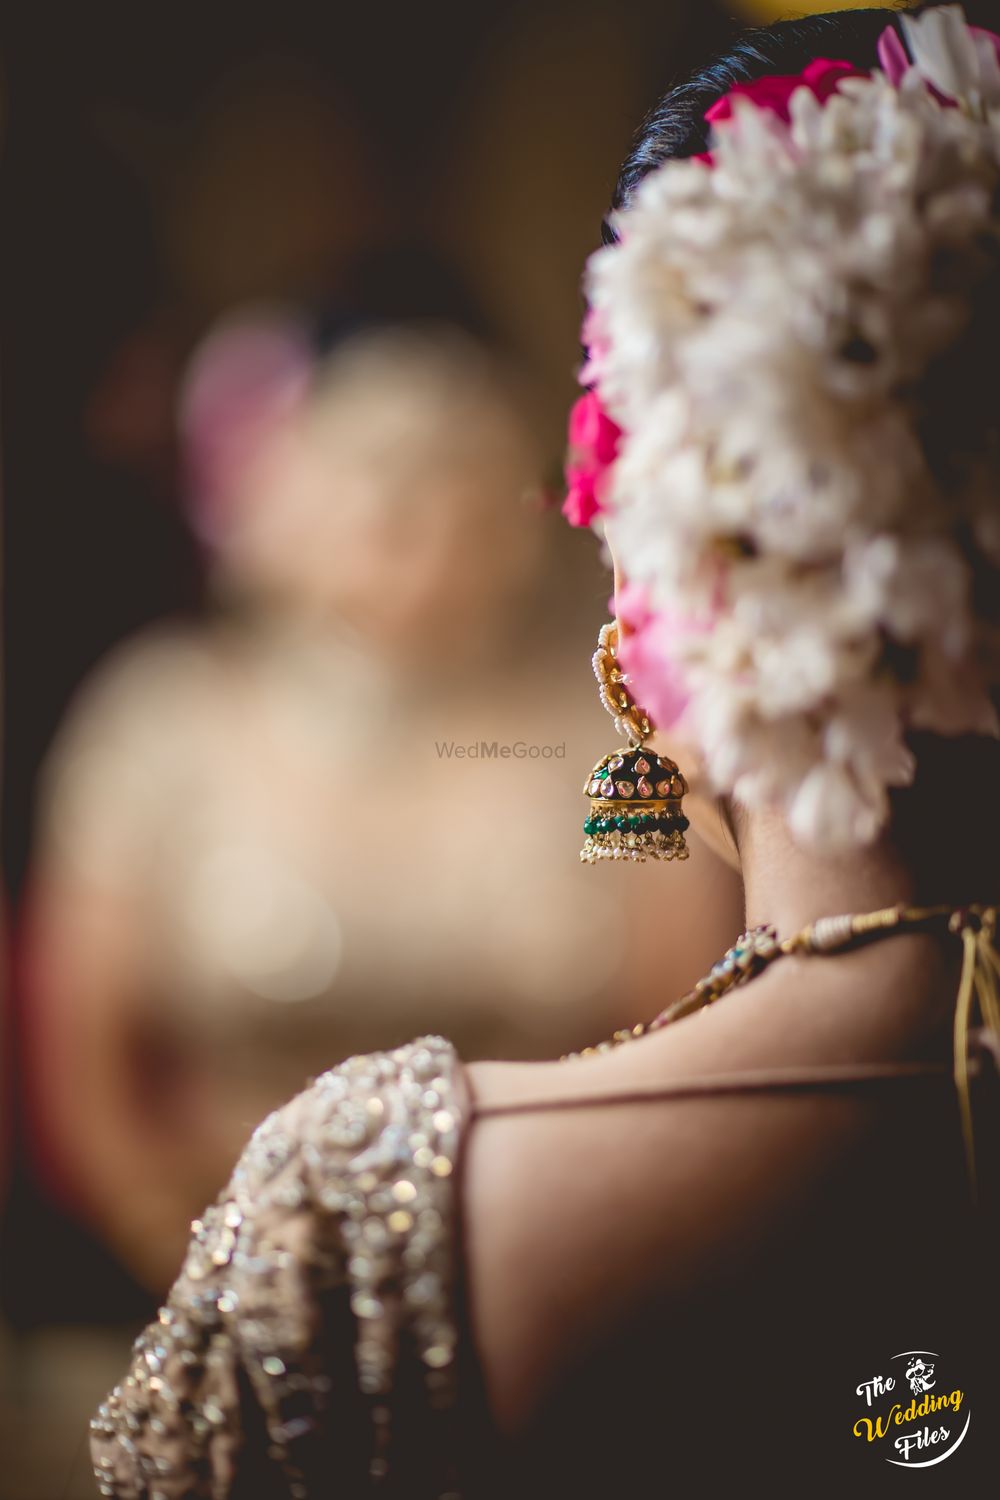 Photo From Prithvi X Nikita || Destination Wedding In Udaipur - By The Wedding Files